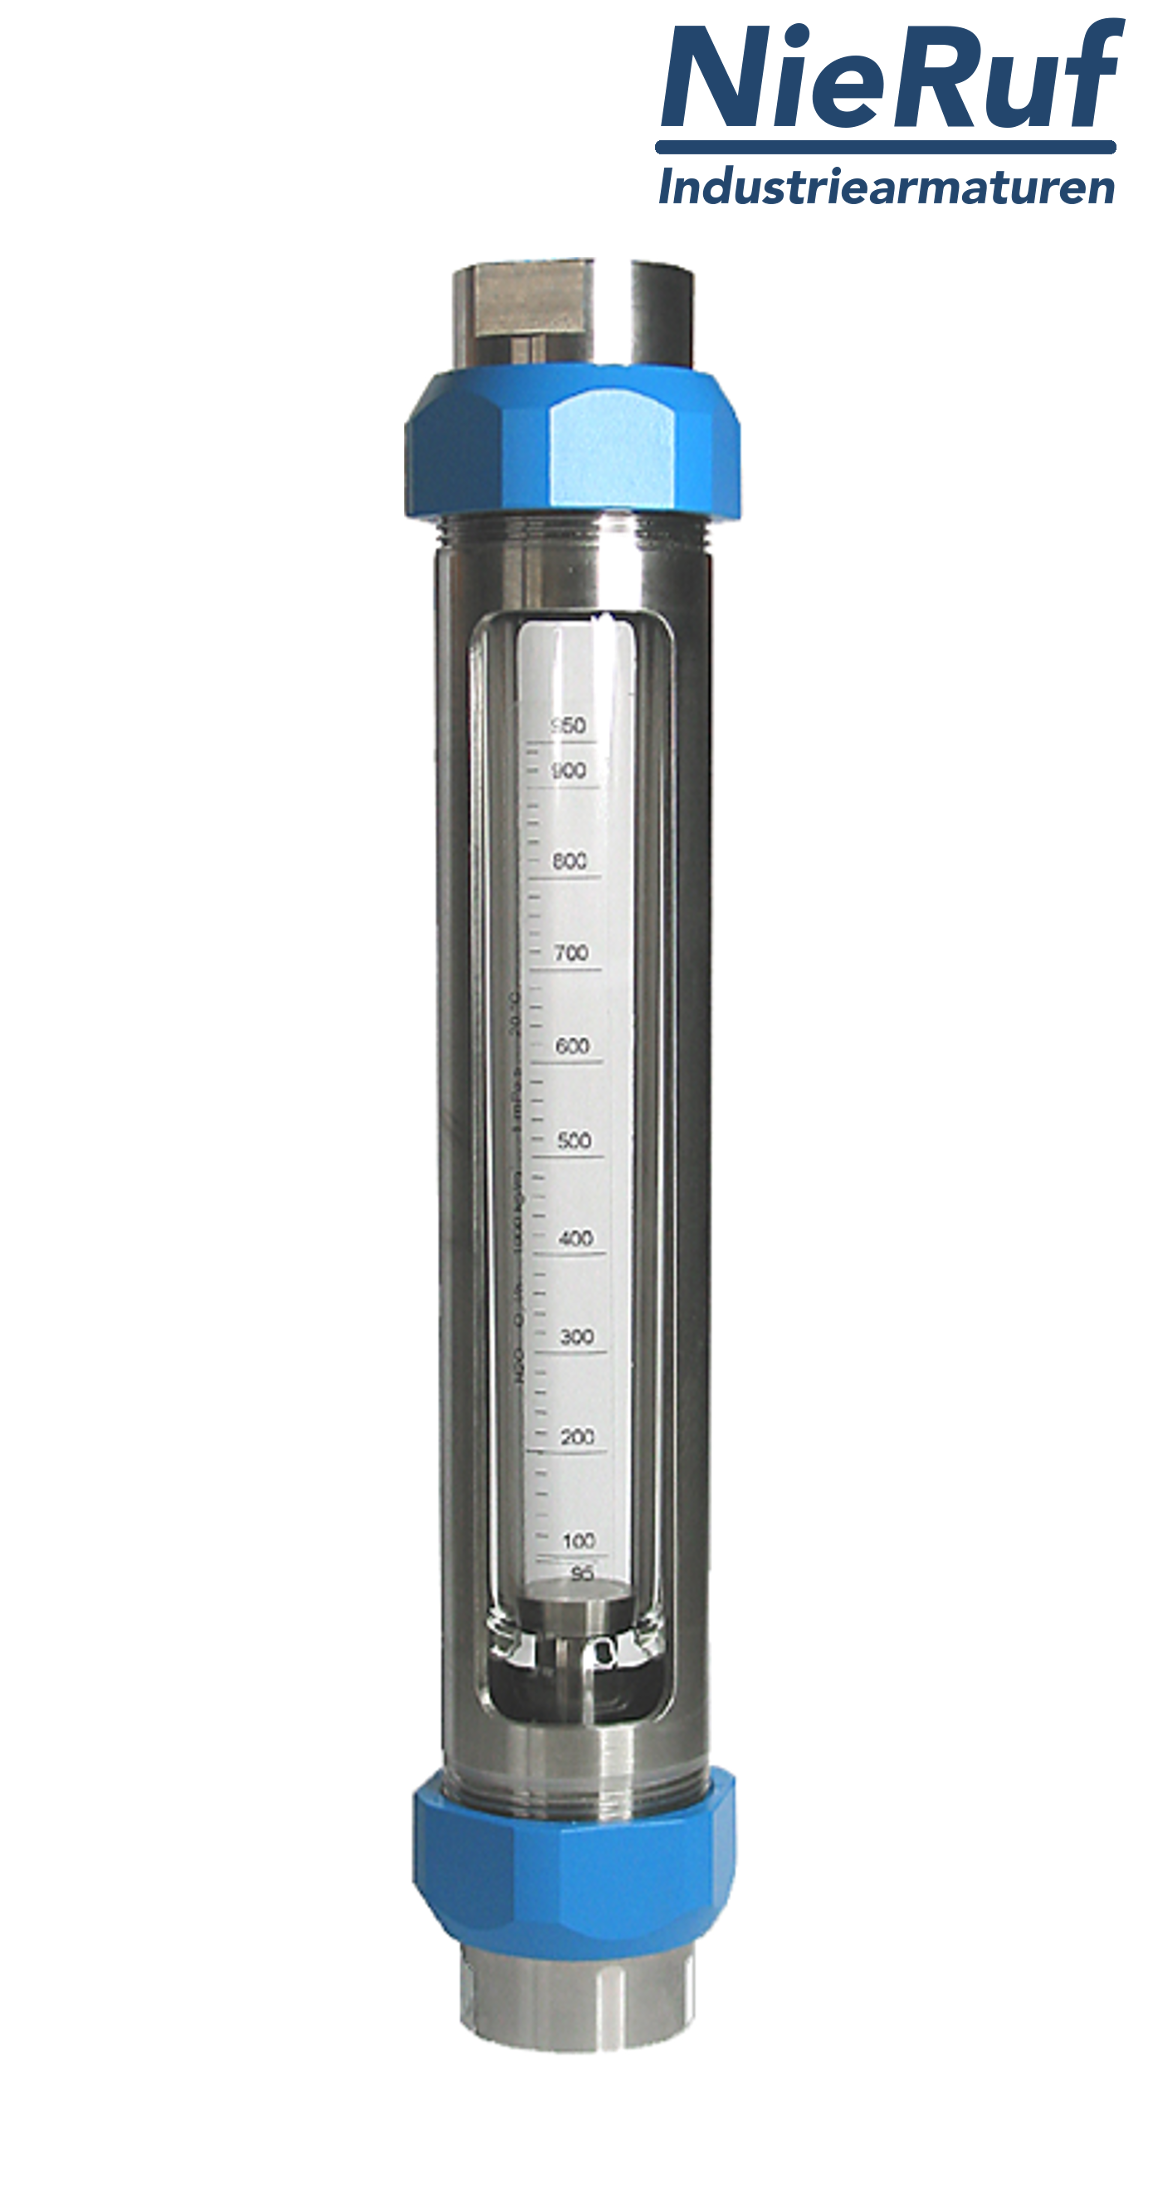 Variable area flowmeter stainless steel + borosilicate 1/4" inch 10.0 - 100.0 l/h water FKM